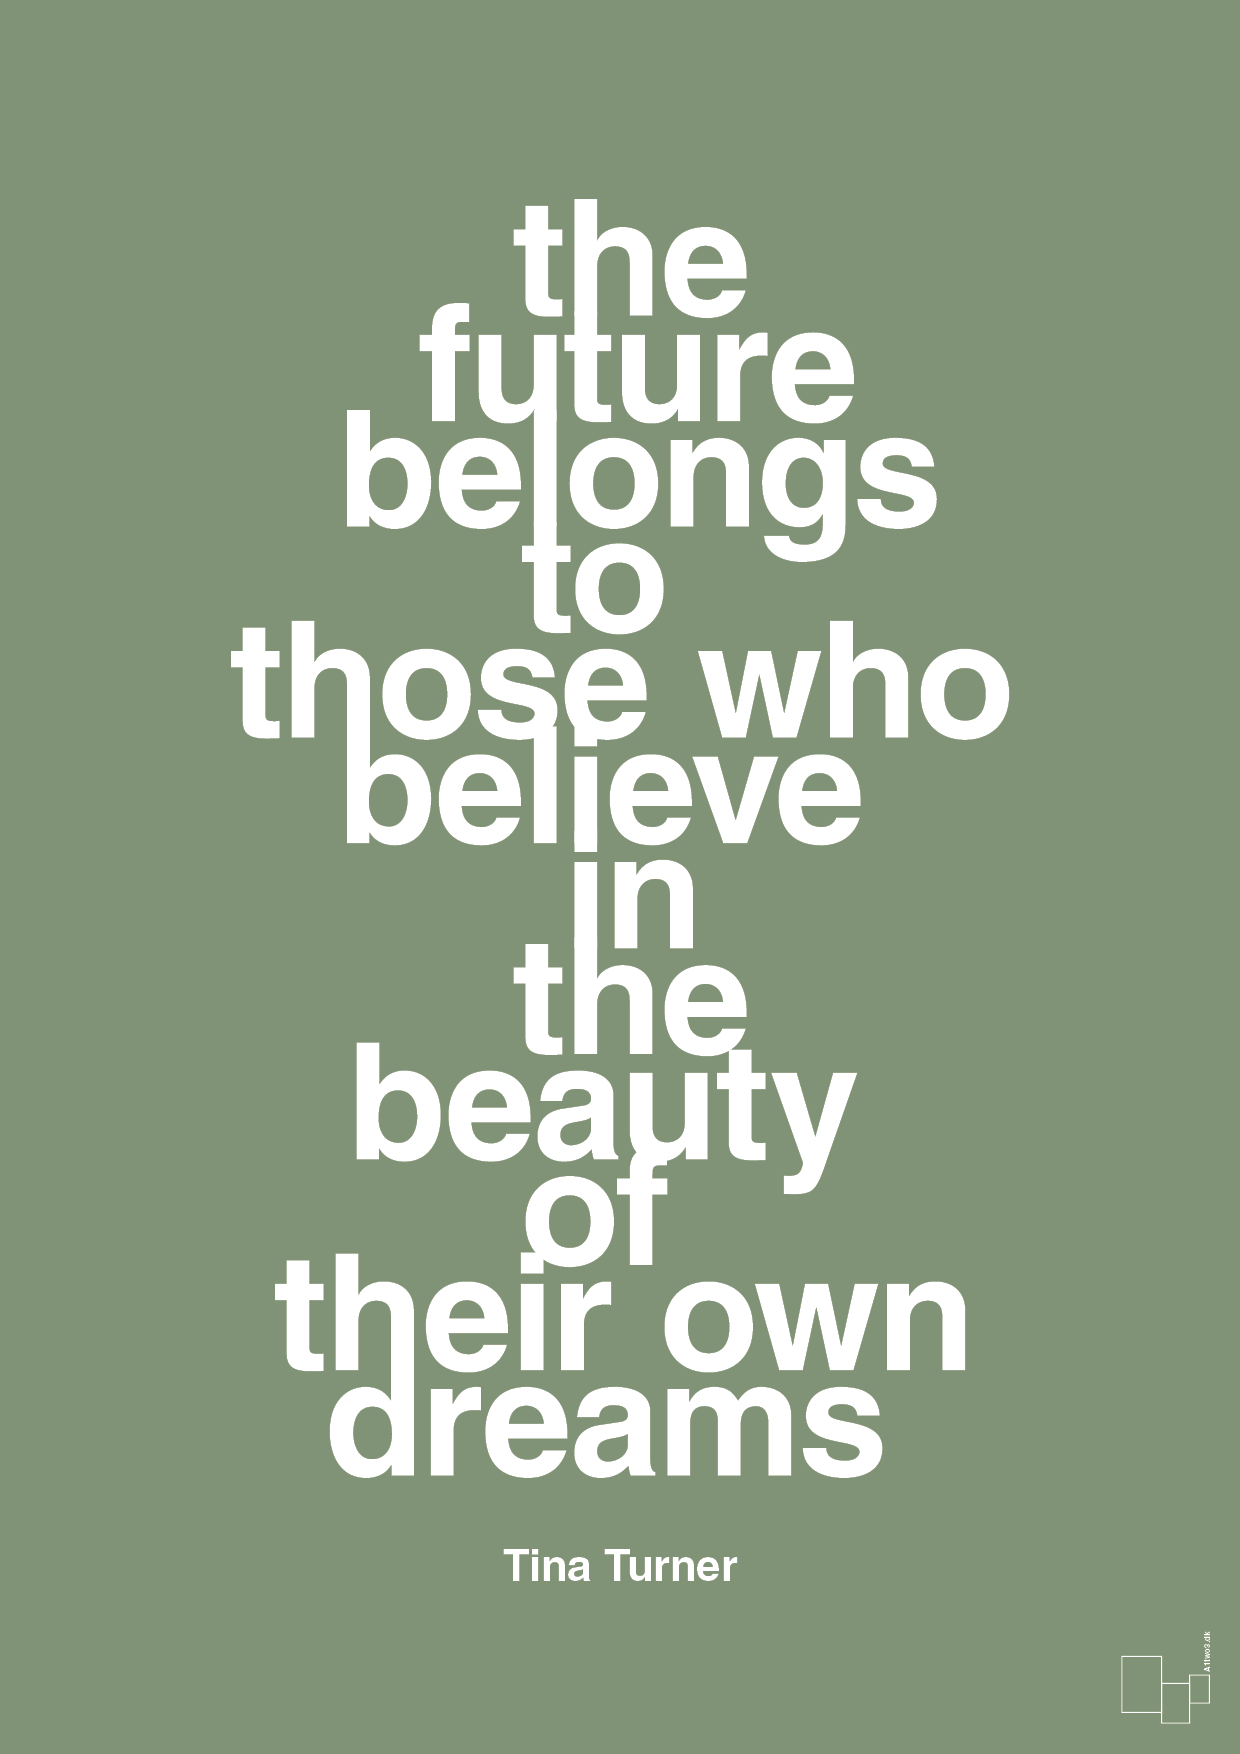 the future belongs to those who believe in the beauty of their own dreams - Plakat med Citater i Jade